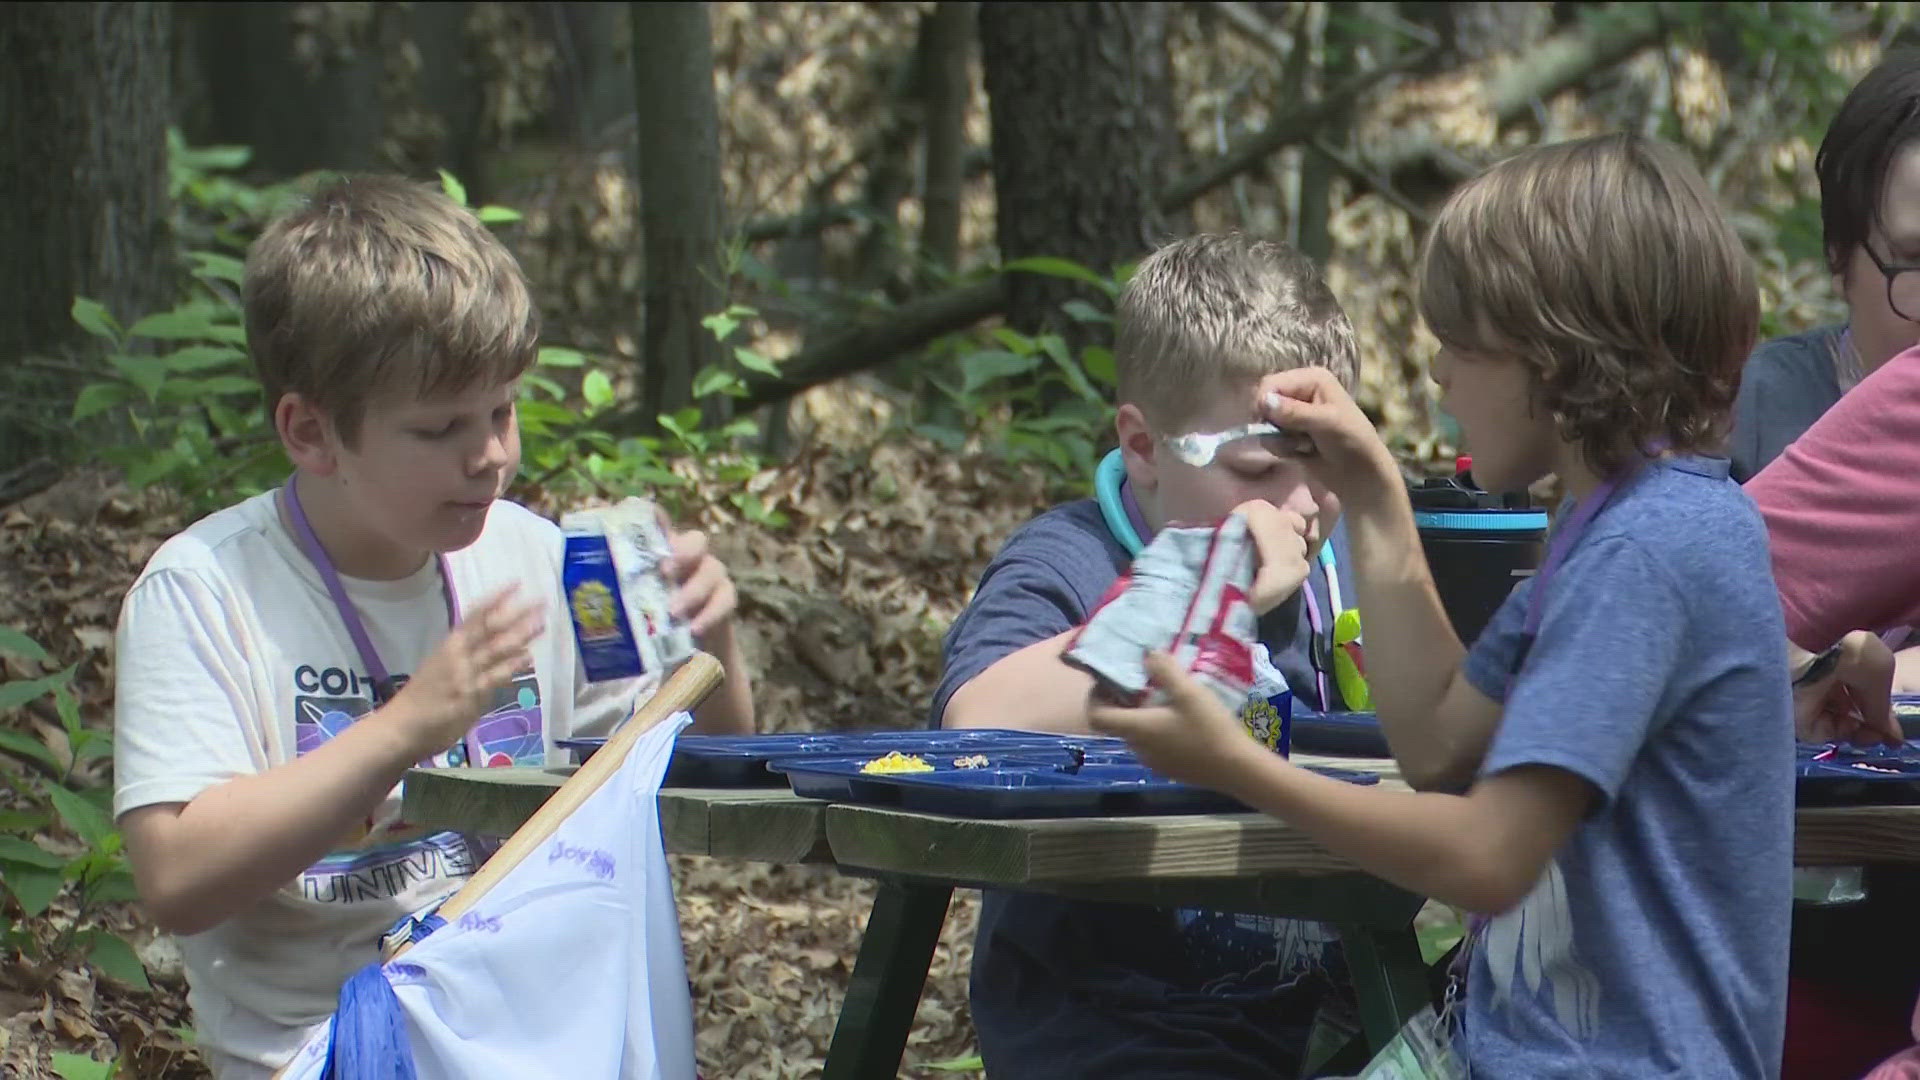 At Camp Miakonda in Sylvania Township, camp director Ellen Watkins says they are constantly reinforcing hydration in a fun way to their Cub Scout kids.